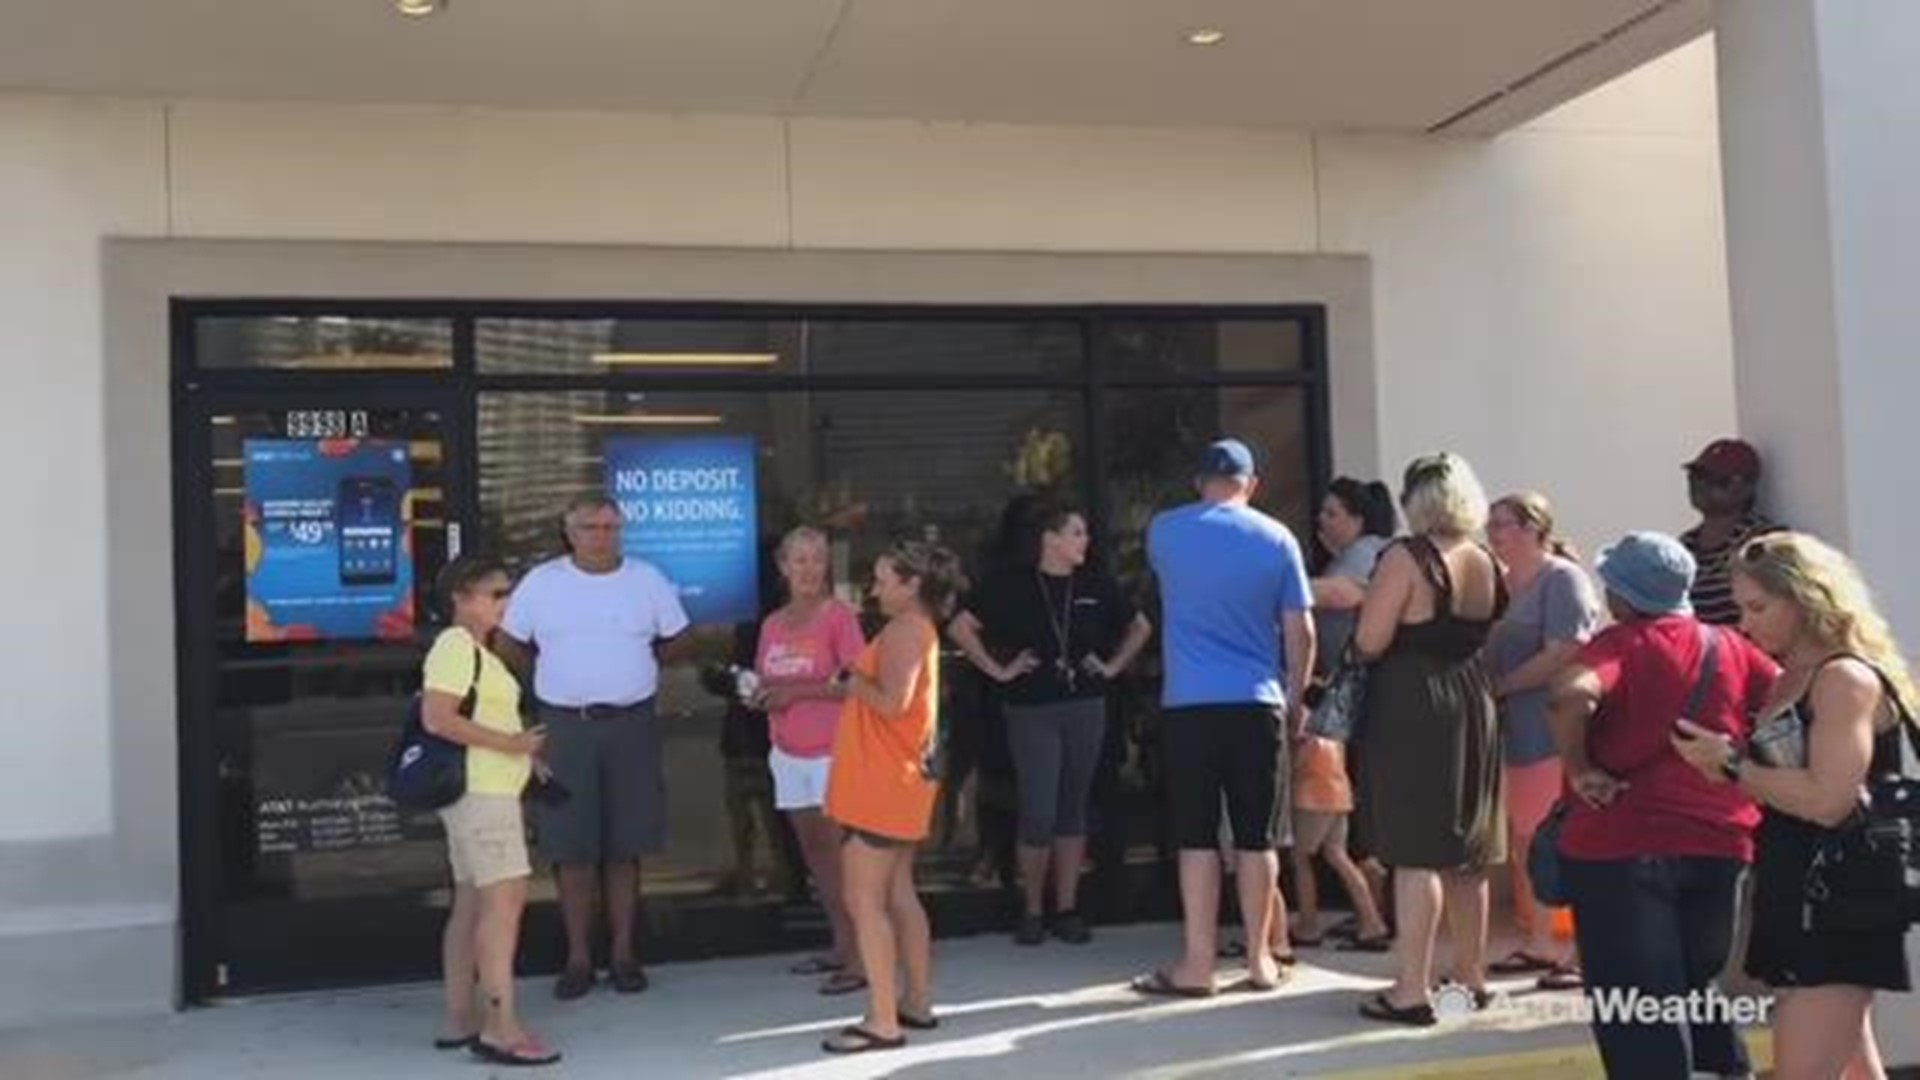 Verizon customers wait in line at an AT&T store in Panama City Beach, Florida to try and switch service so they can contact family and take care of business. 